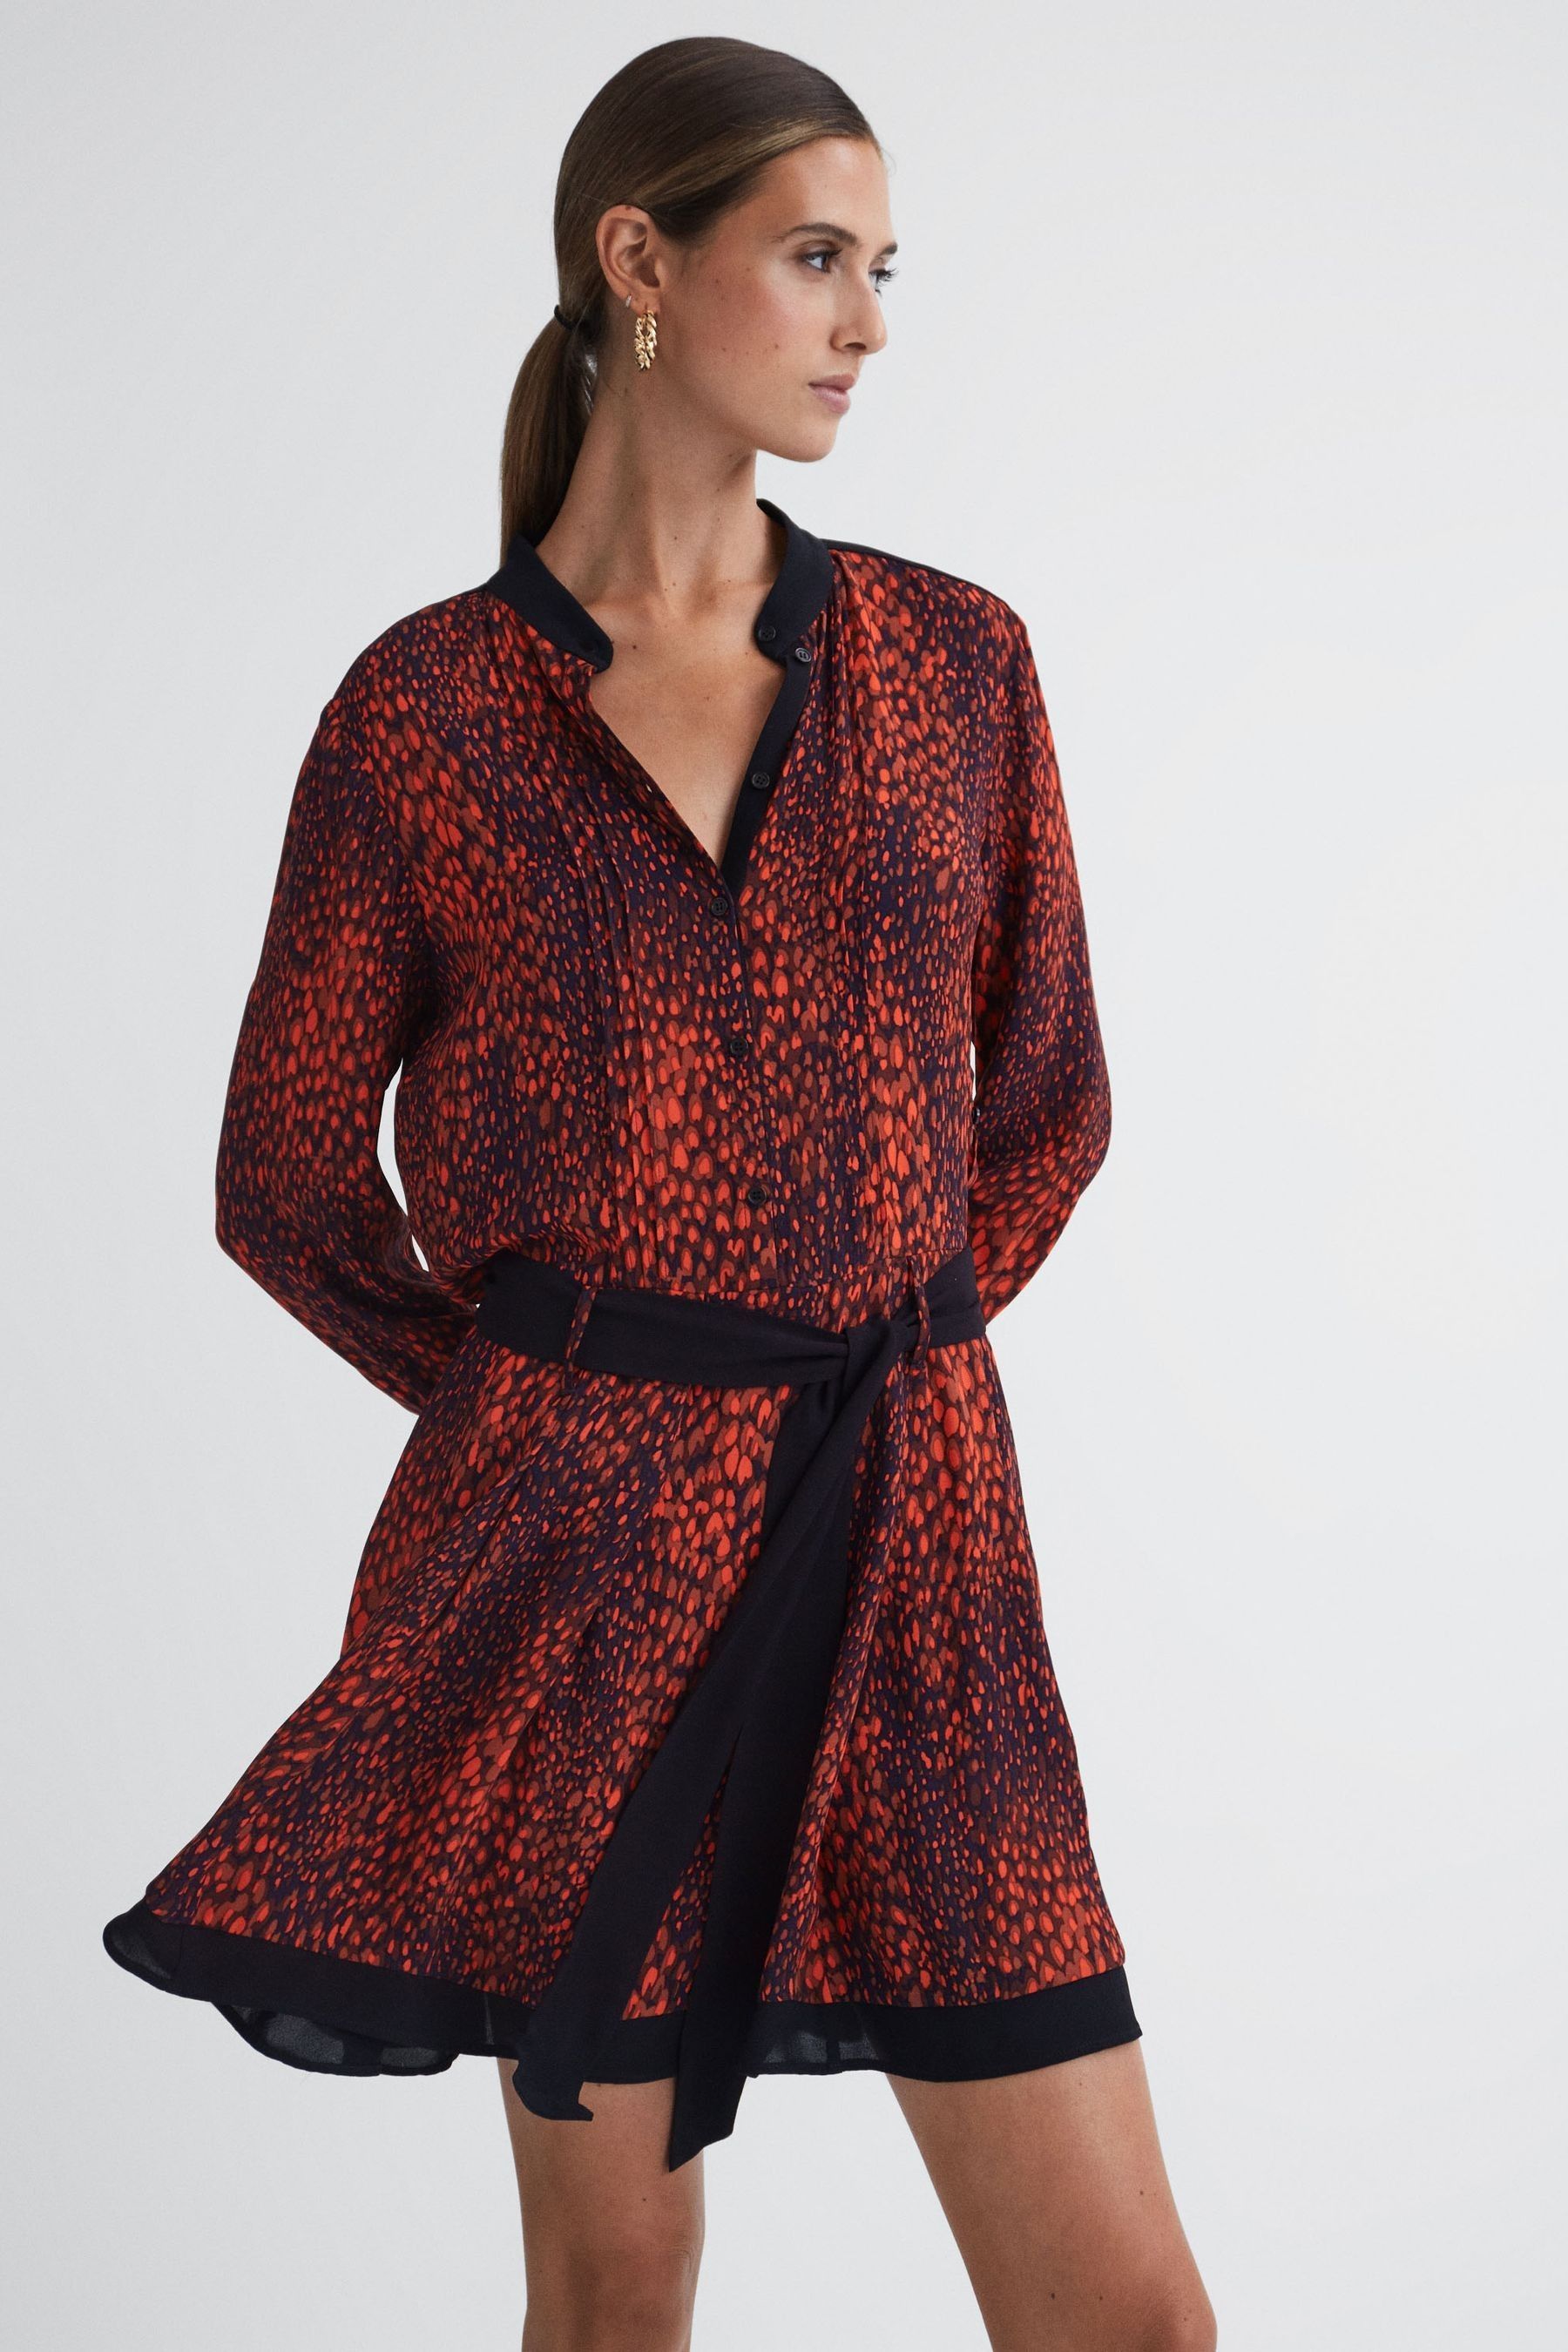 Reiss Kinsey - Red Animal Print Belted Mini Dress, Us 4